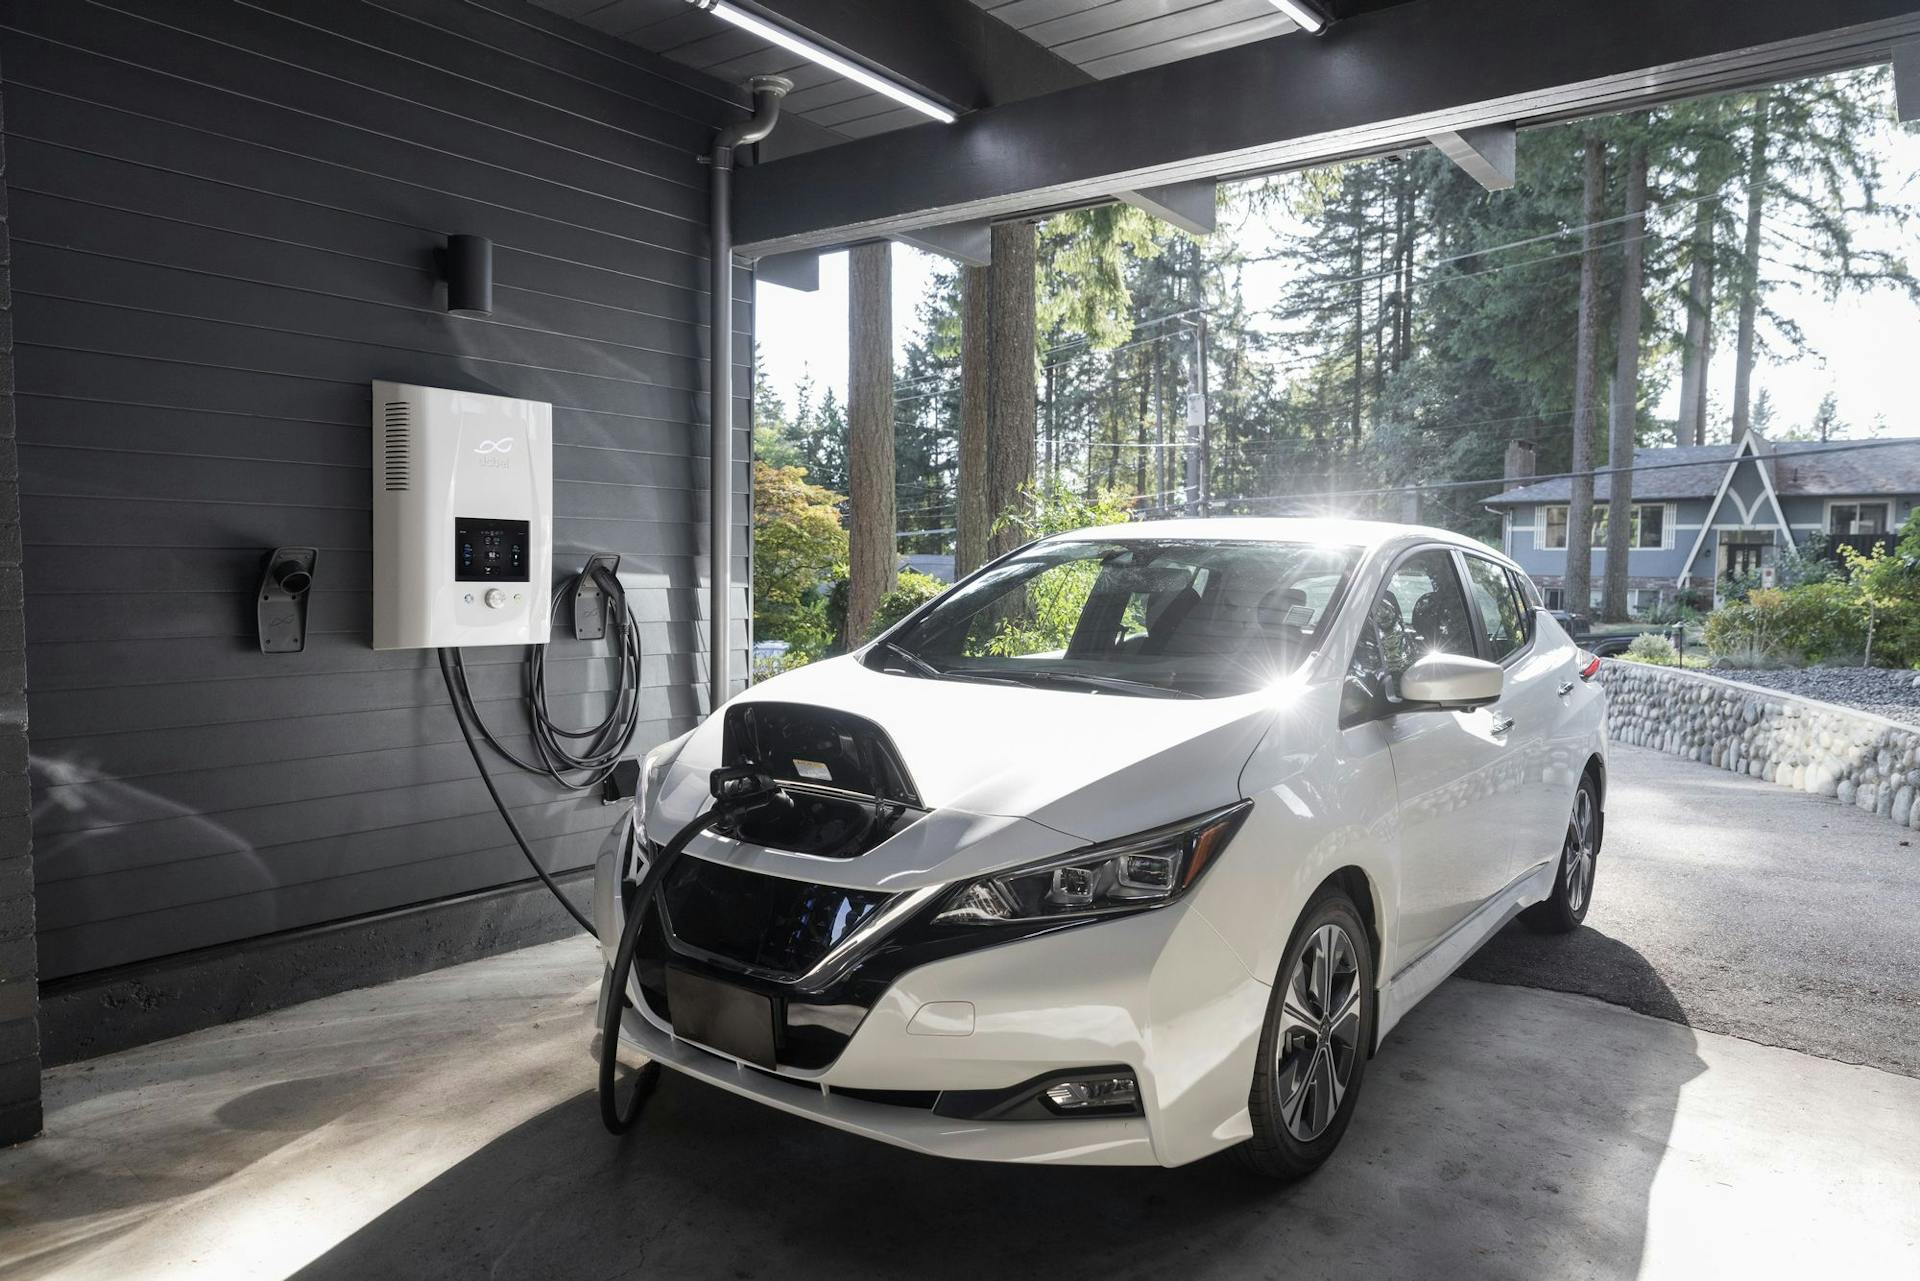 Cost of EV Charging Installation